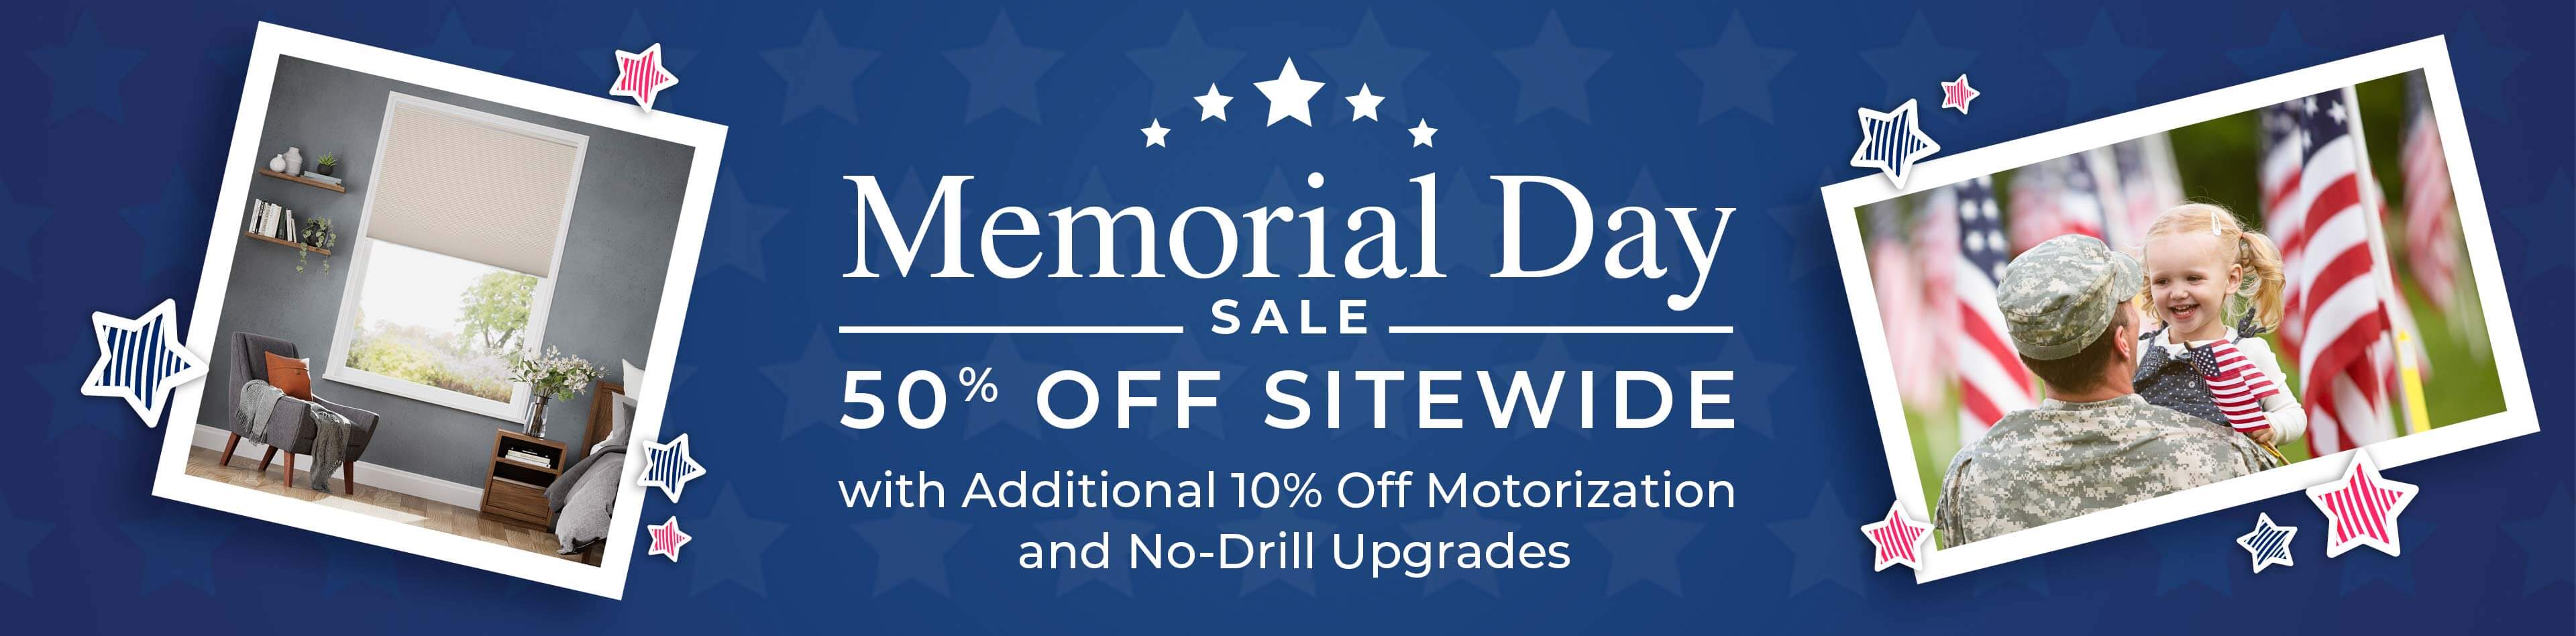 Shop Our Memorial Day Sale Sitewide